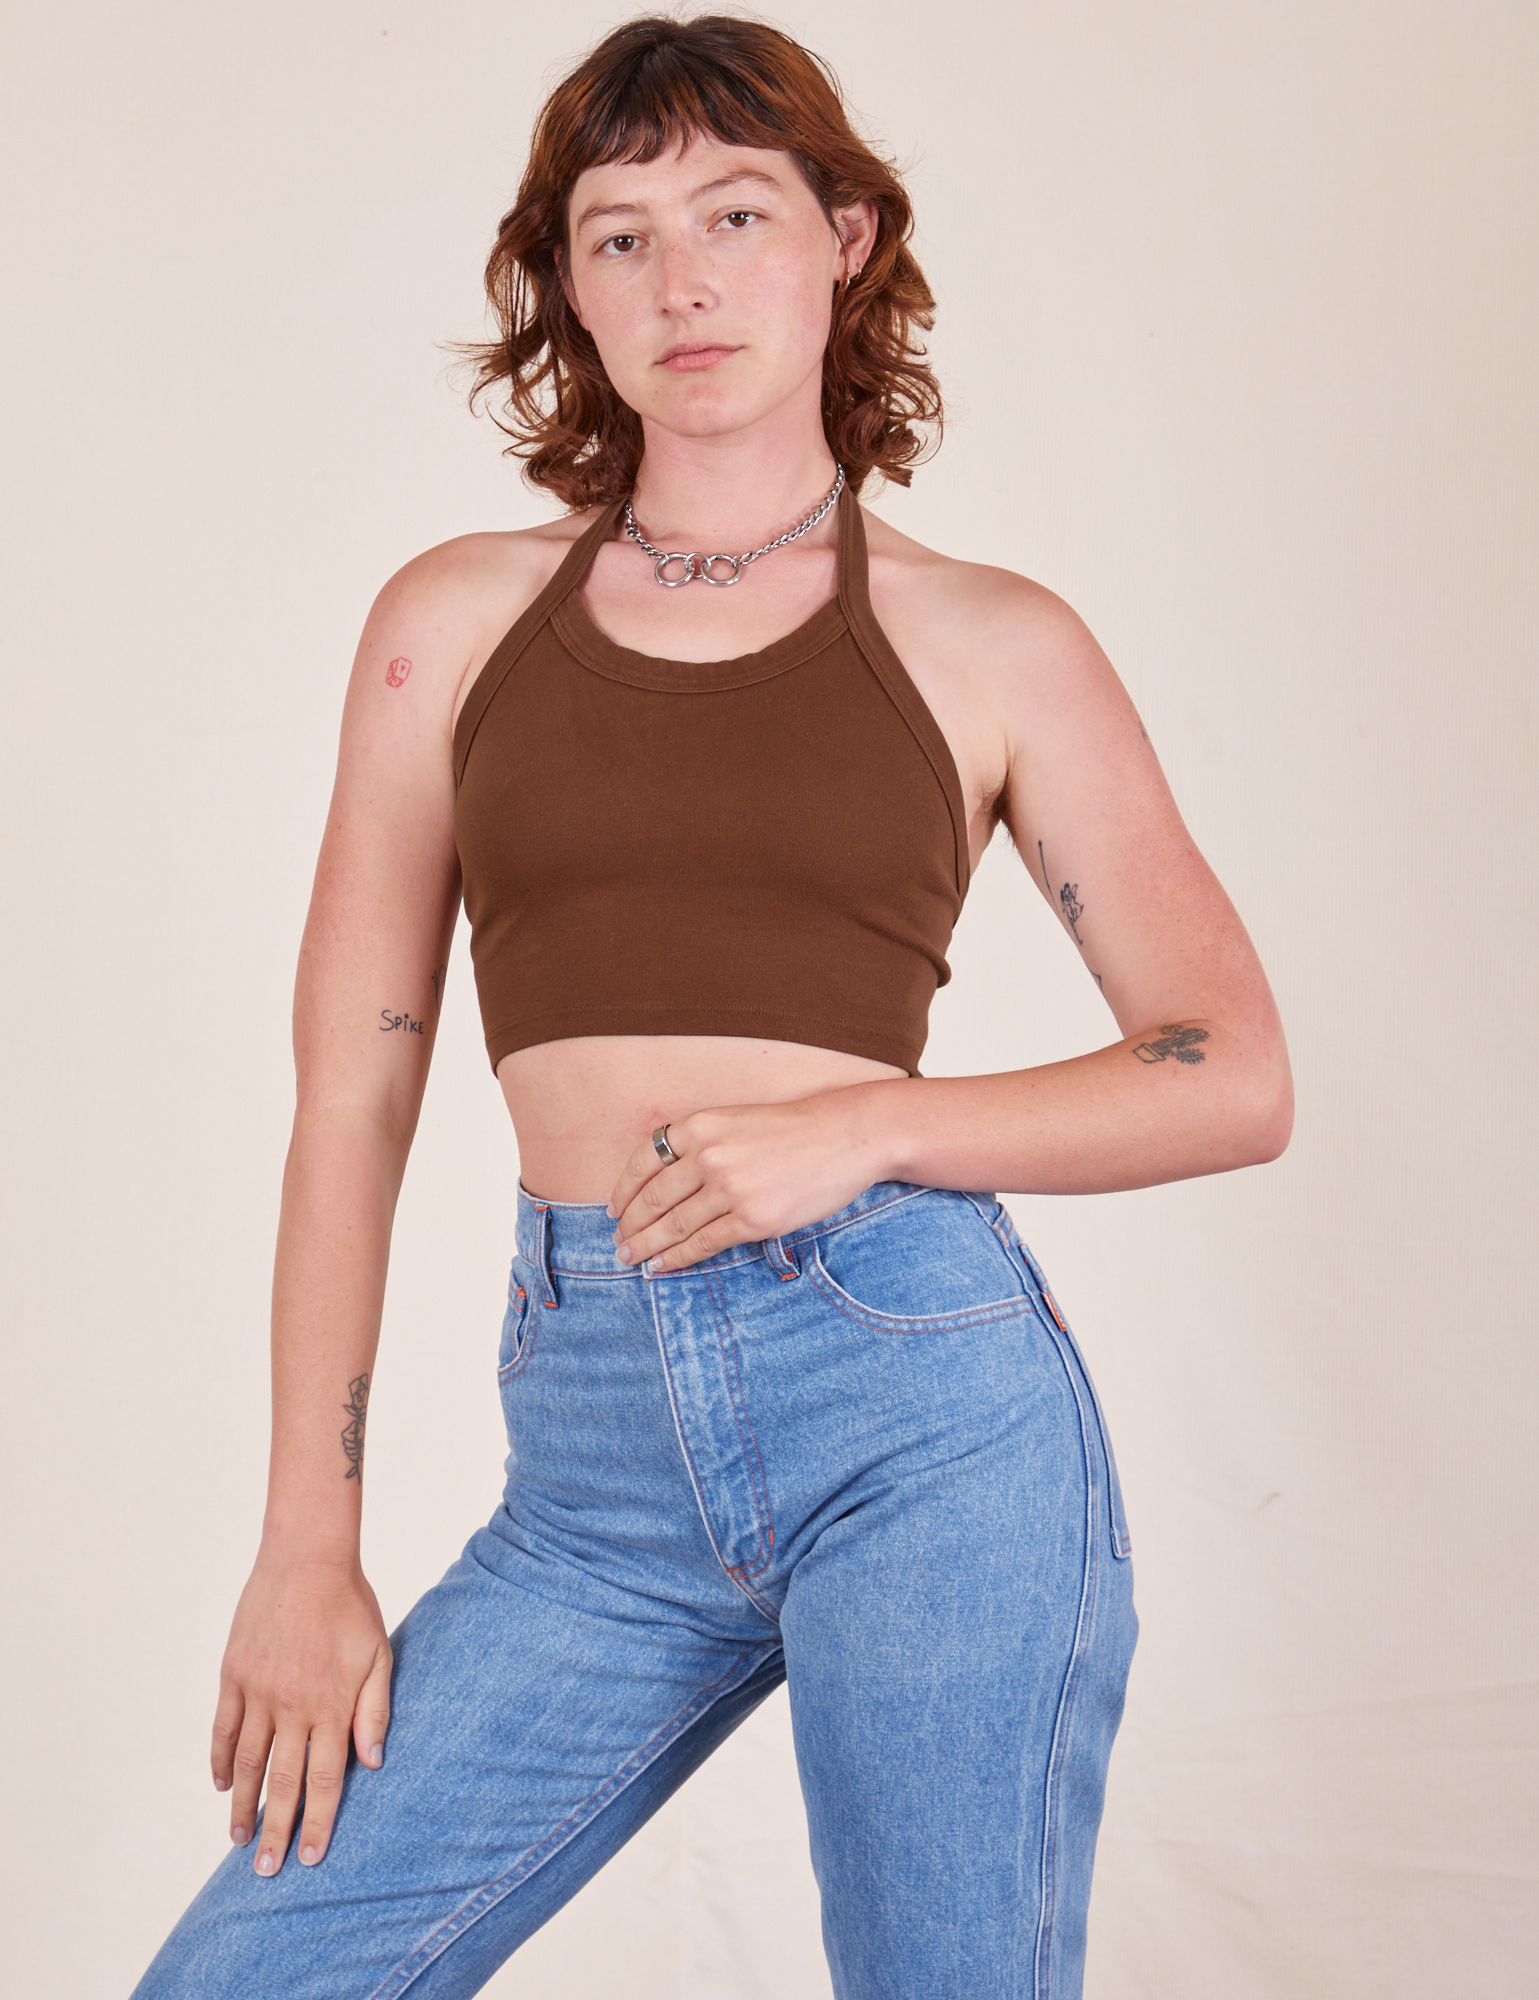 Alex is 5&#39;8&quot; and wearing P Halter Top in Fudgesicle Brown worn with light wash Frontier Jeans